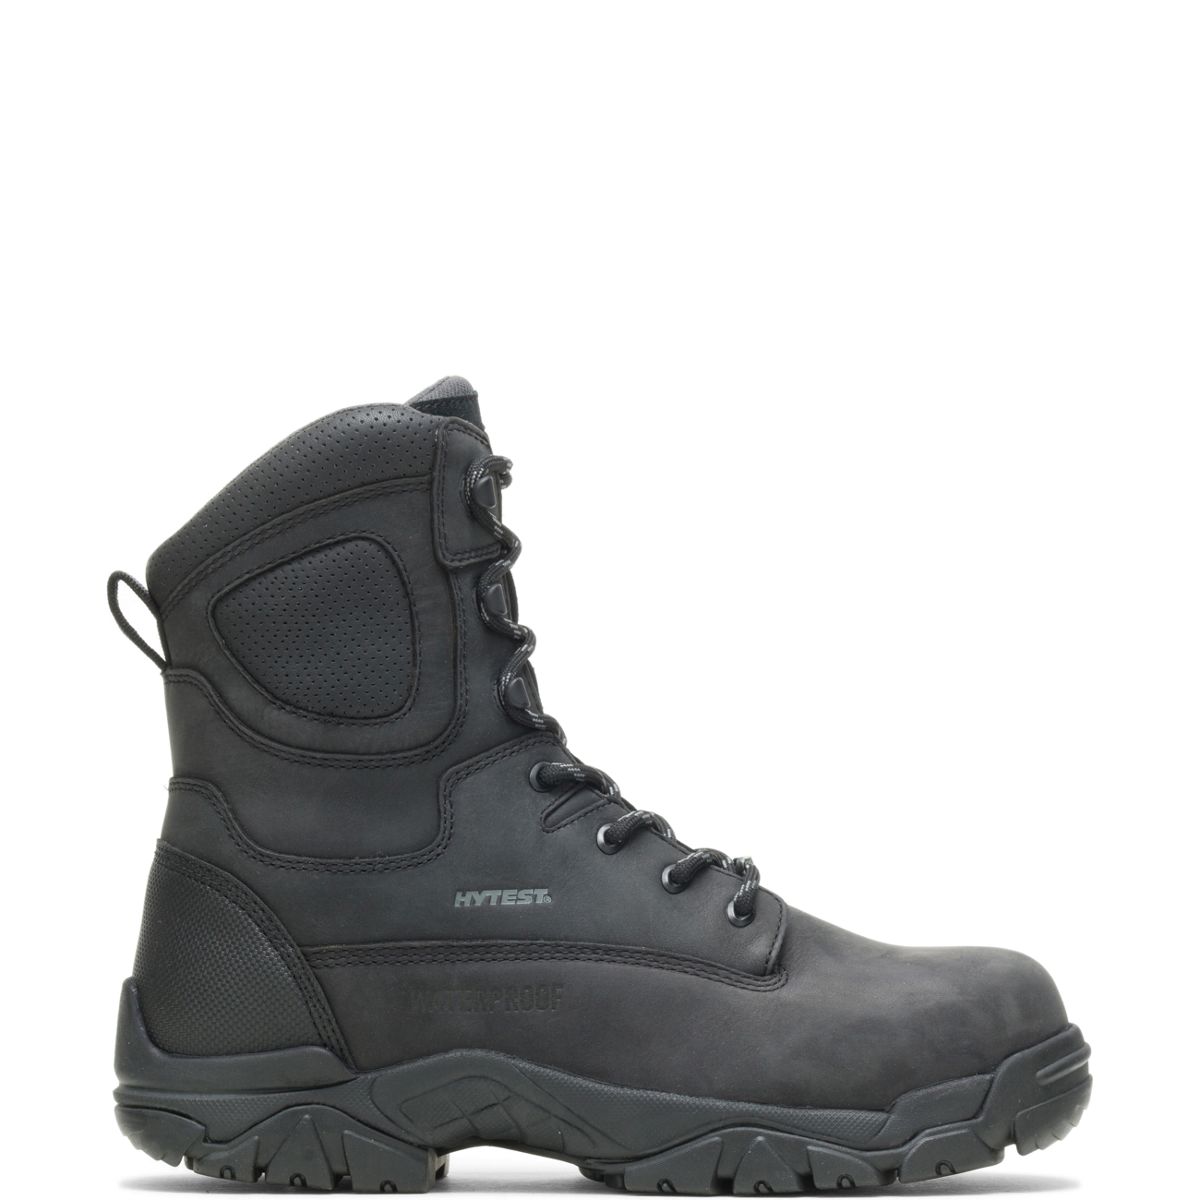 women's puncture resistant work boots